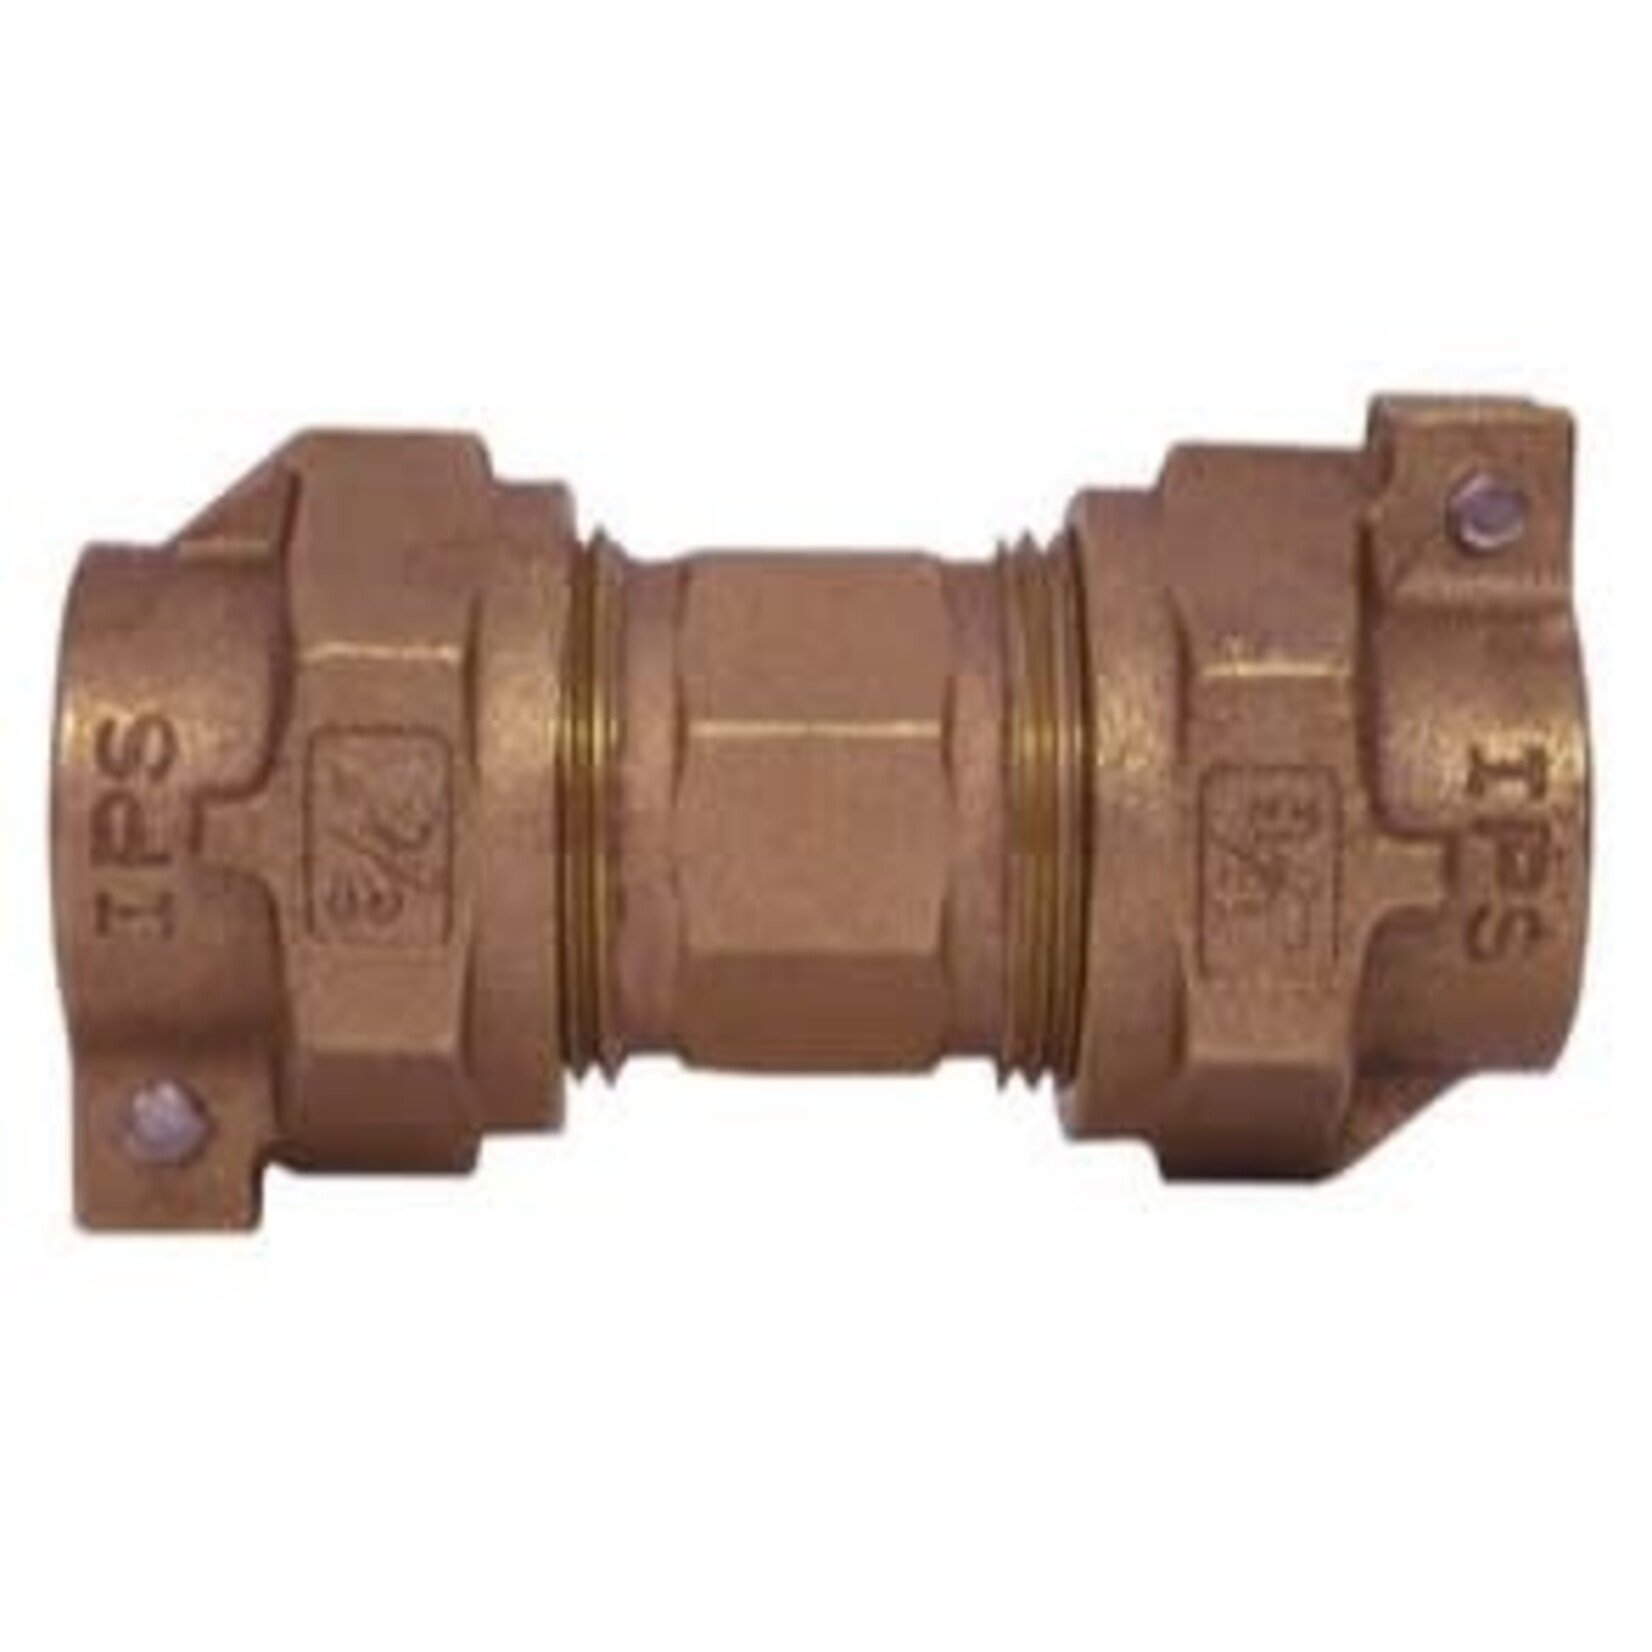 LEGEND VALVE 1 IN BRASS PACK JOINT COUPLING (IPS)